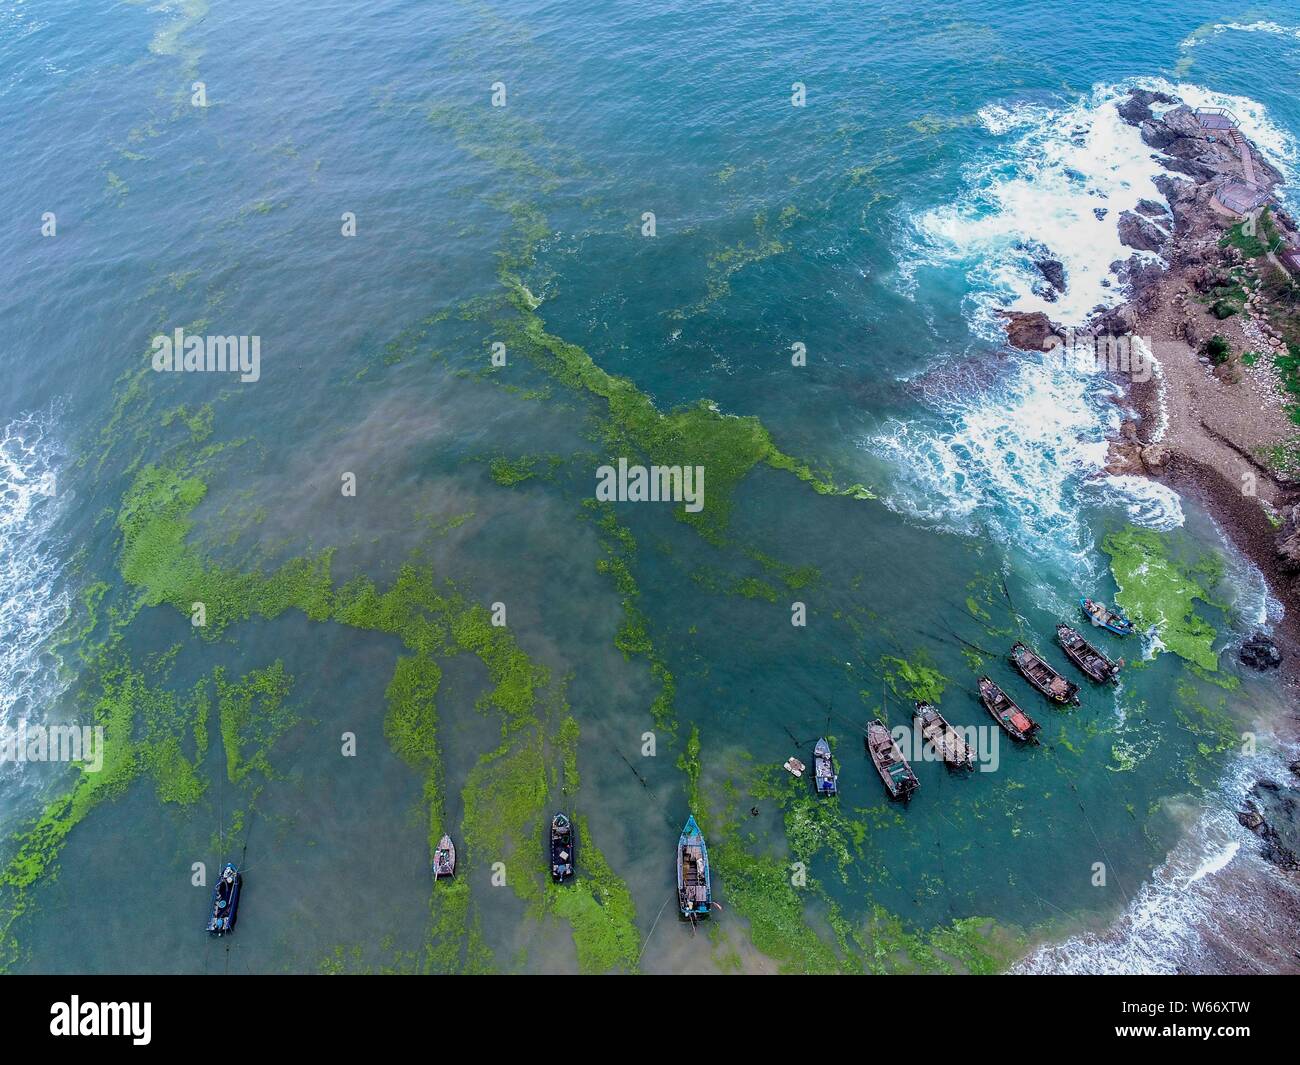 Seashore is covered by green algae, or enteromorpha prolifera, in Qingdao city, east China's Shandong province, 3 July 2018.   A substantial amount of Stock Photo